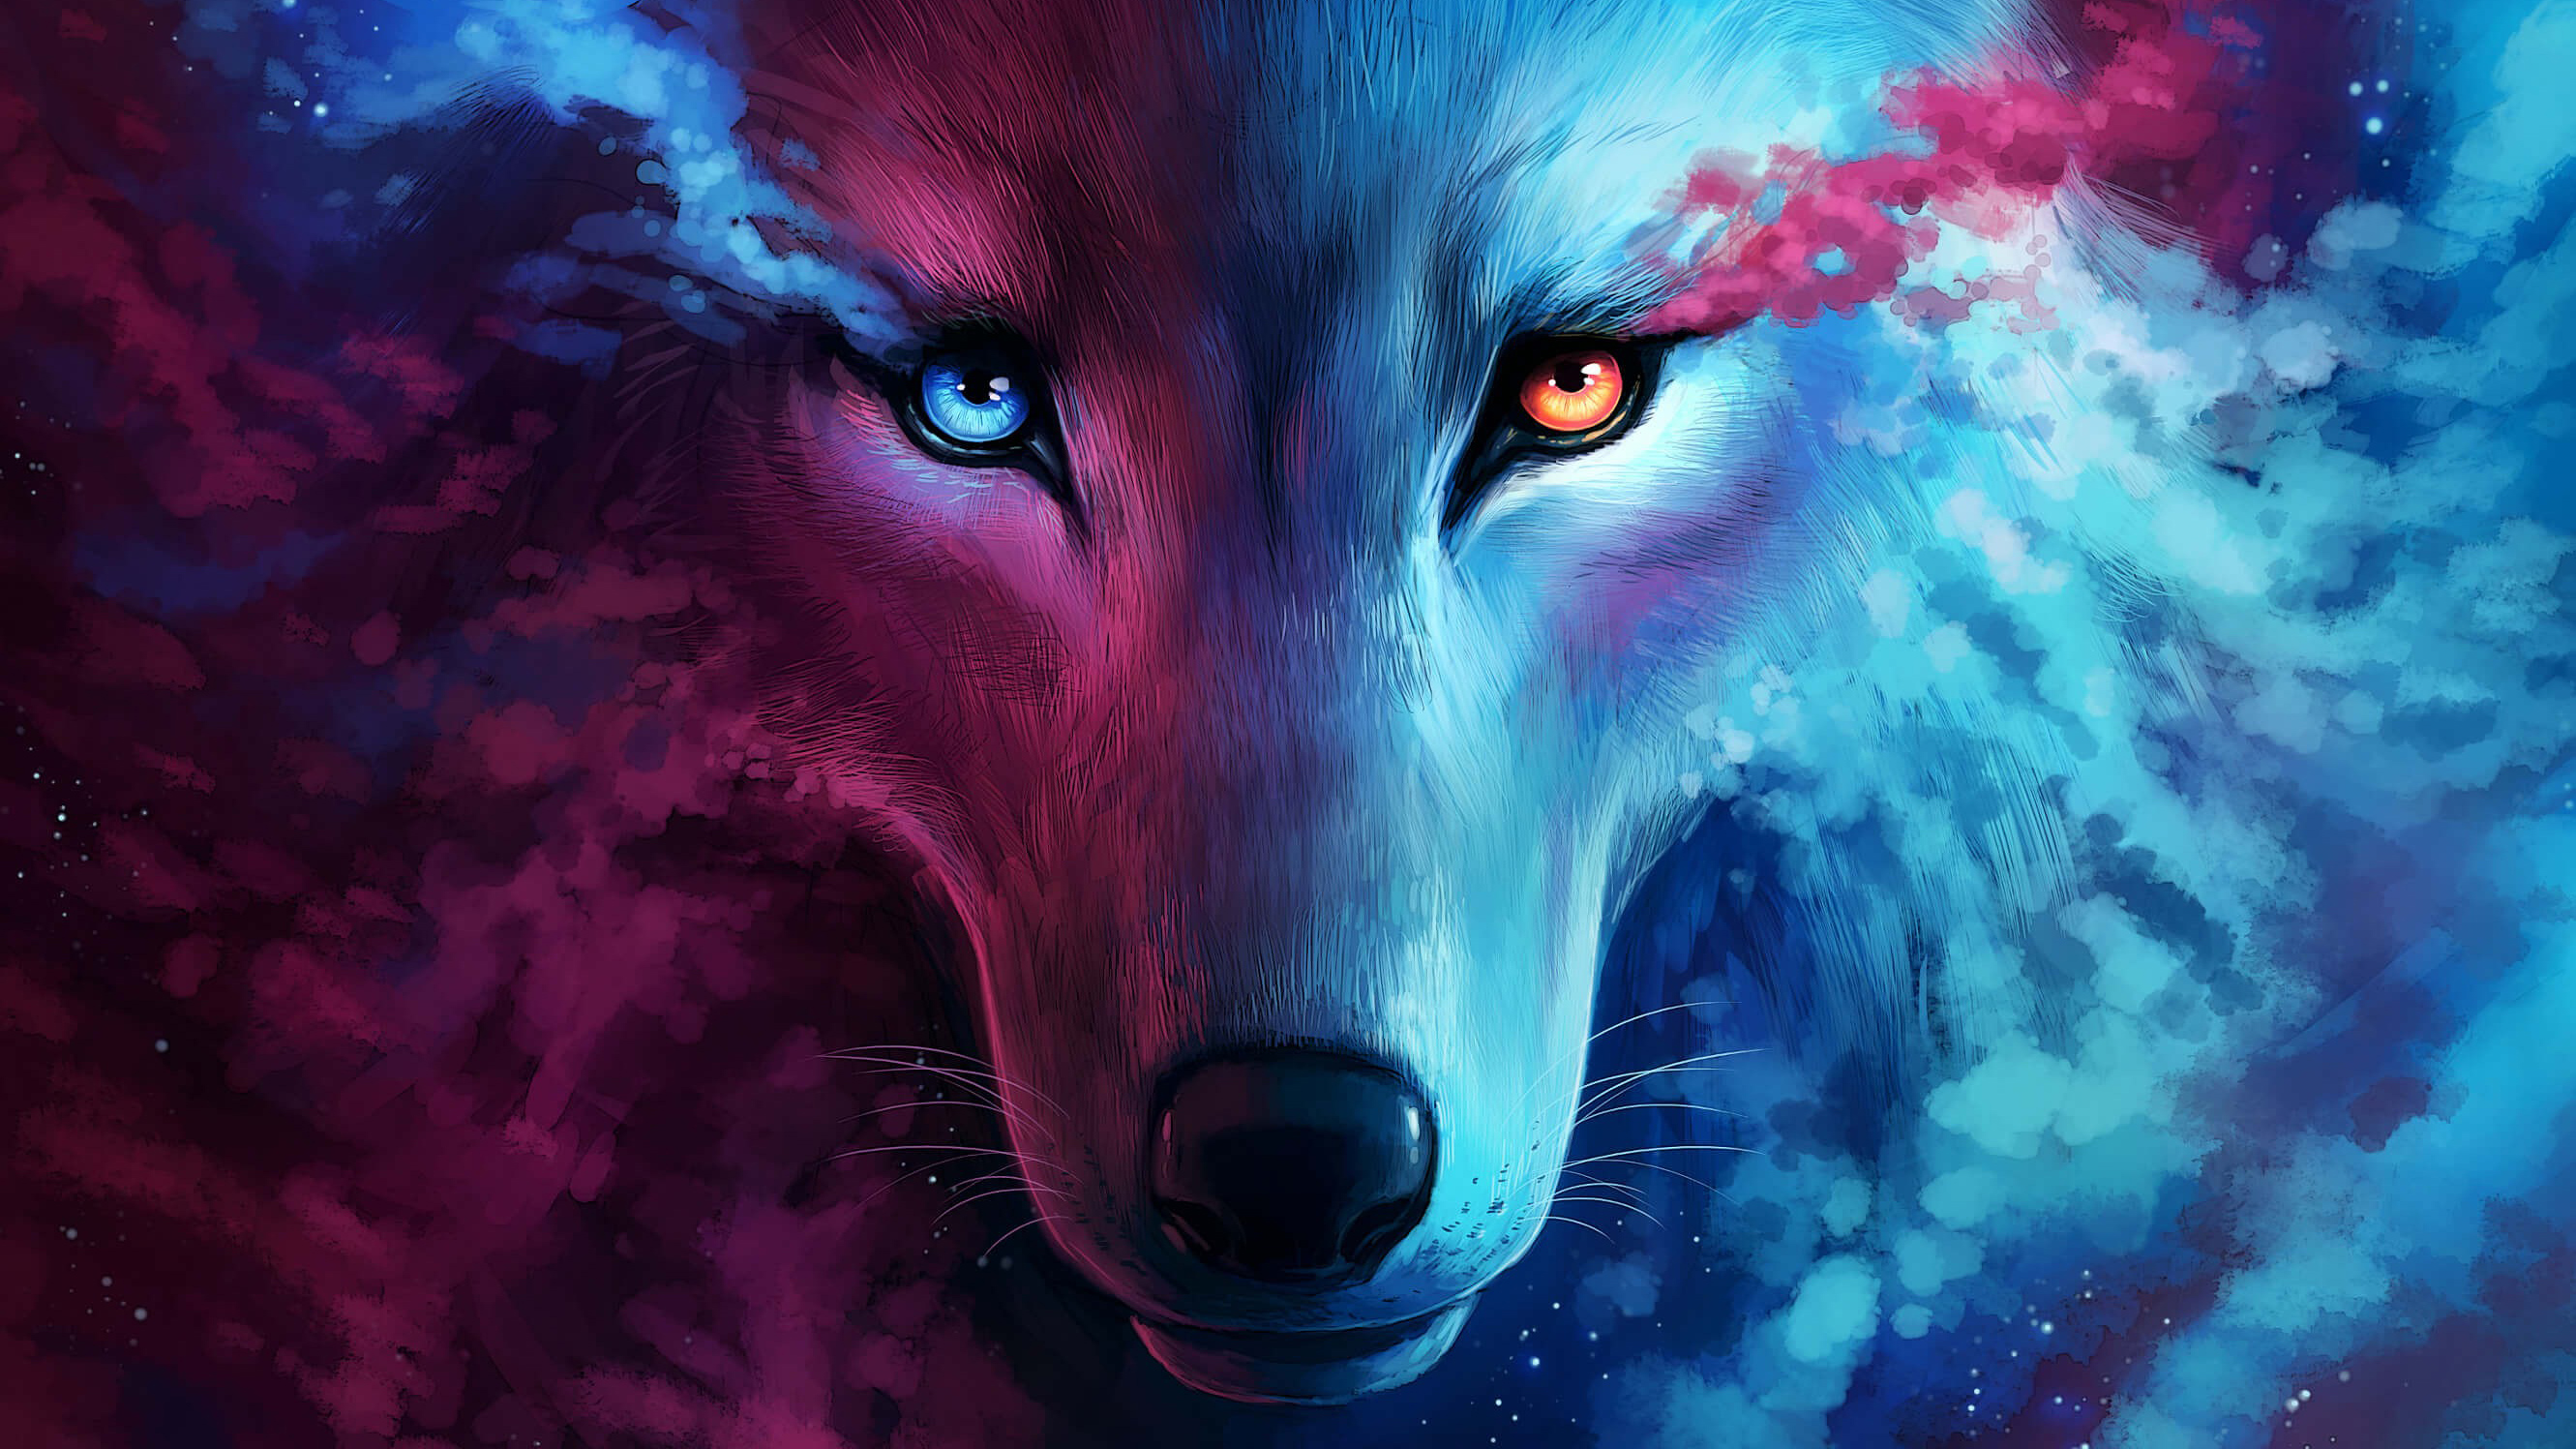 The galaxy wolf hd artist k wallpapers images backgrounds photos and pictures